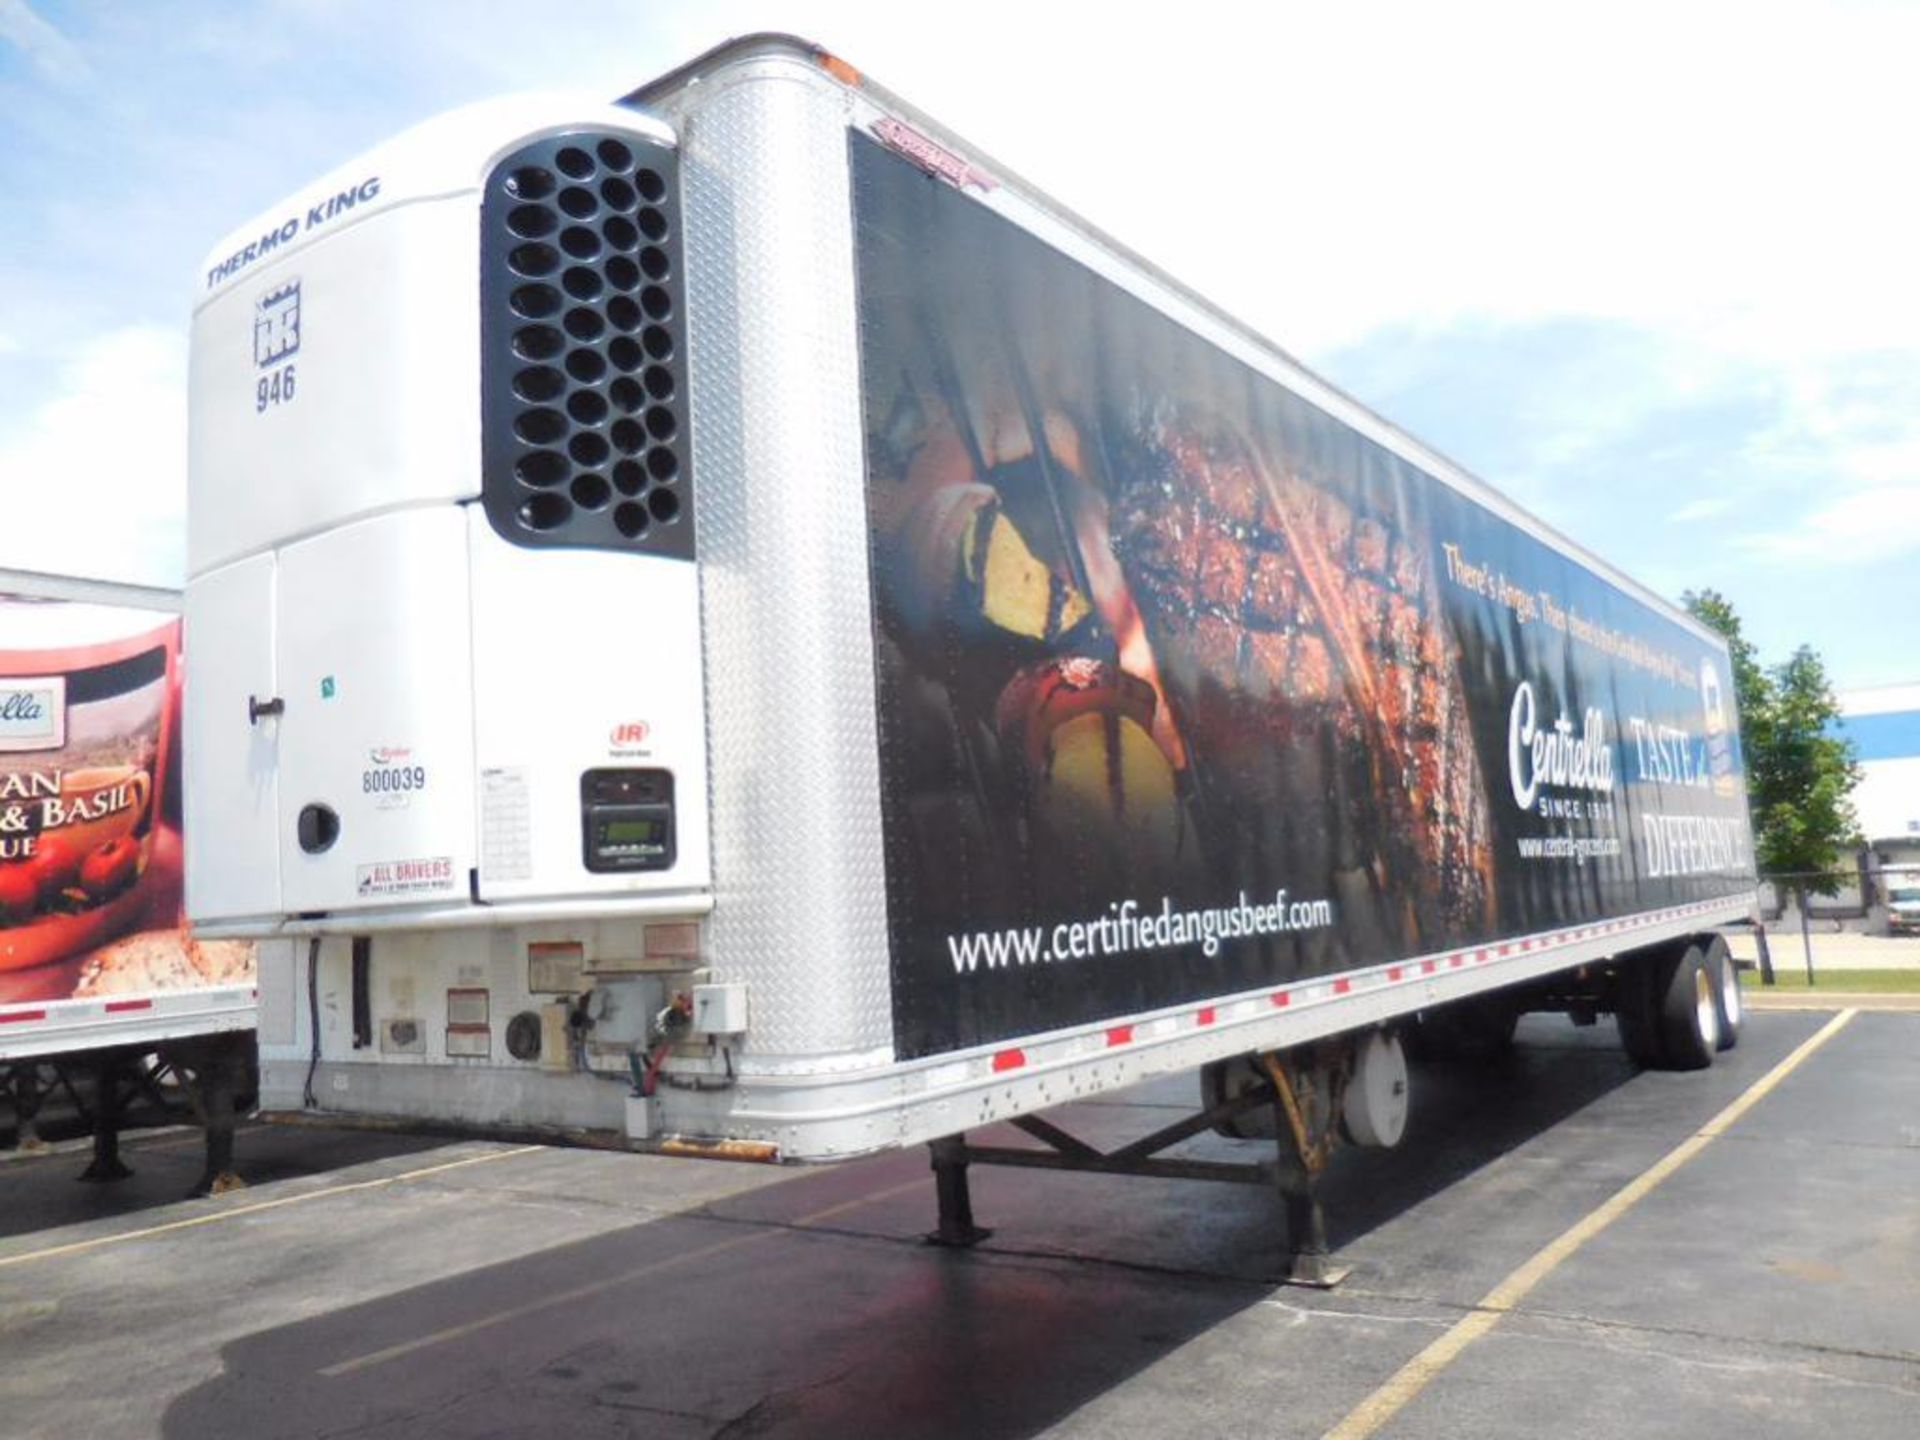 2009 Great Dane 48' Refrigerated Trailer, VIN # 1GRAA96289B702024, Unit 946 - Image 2 of 14